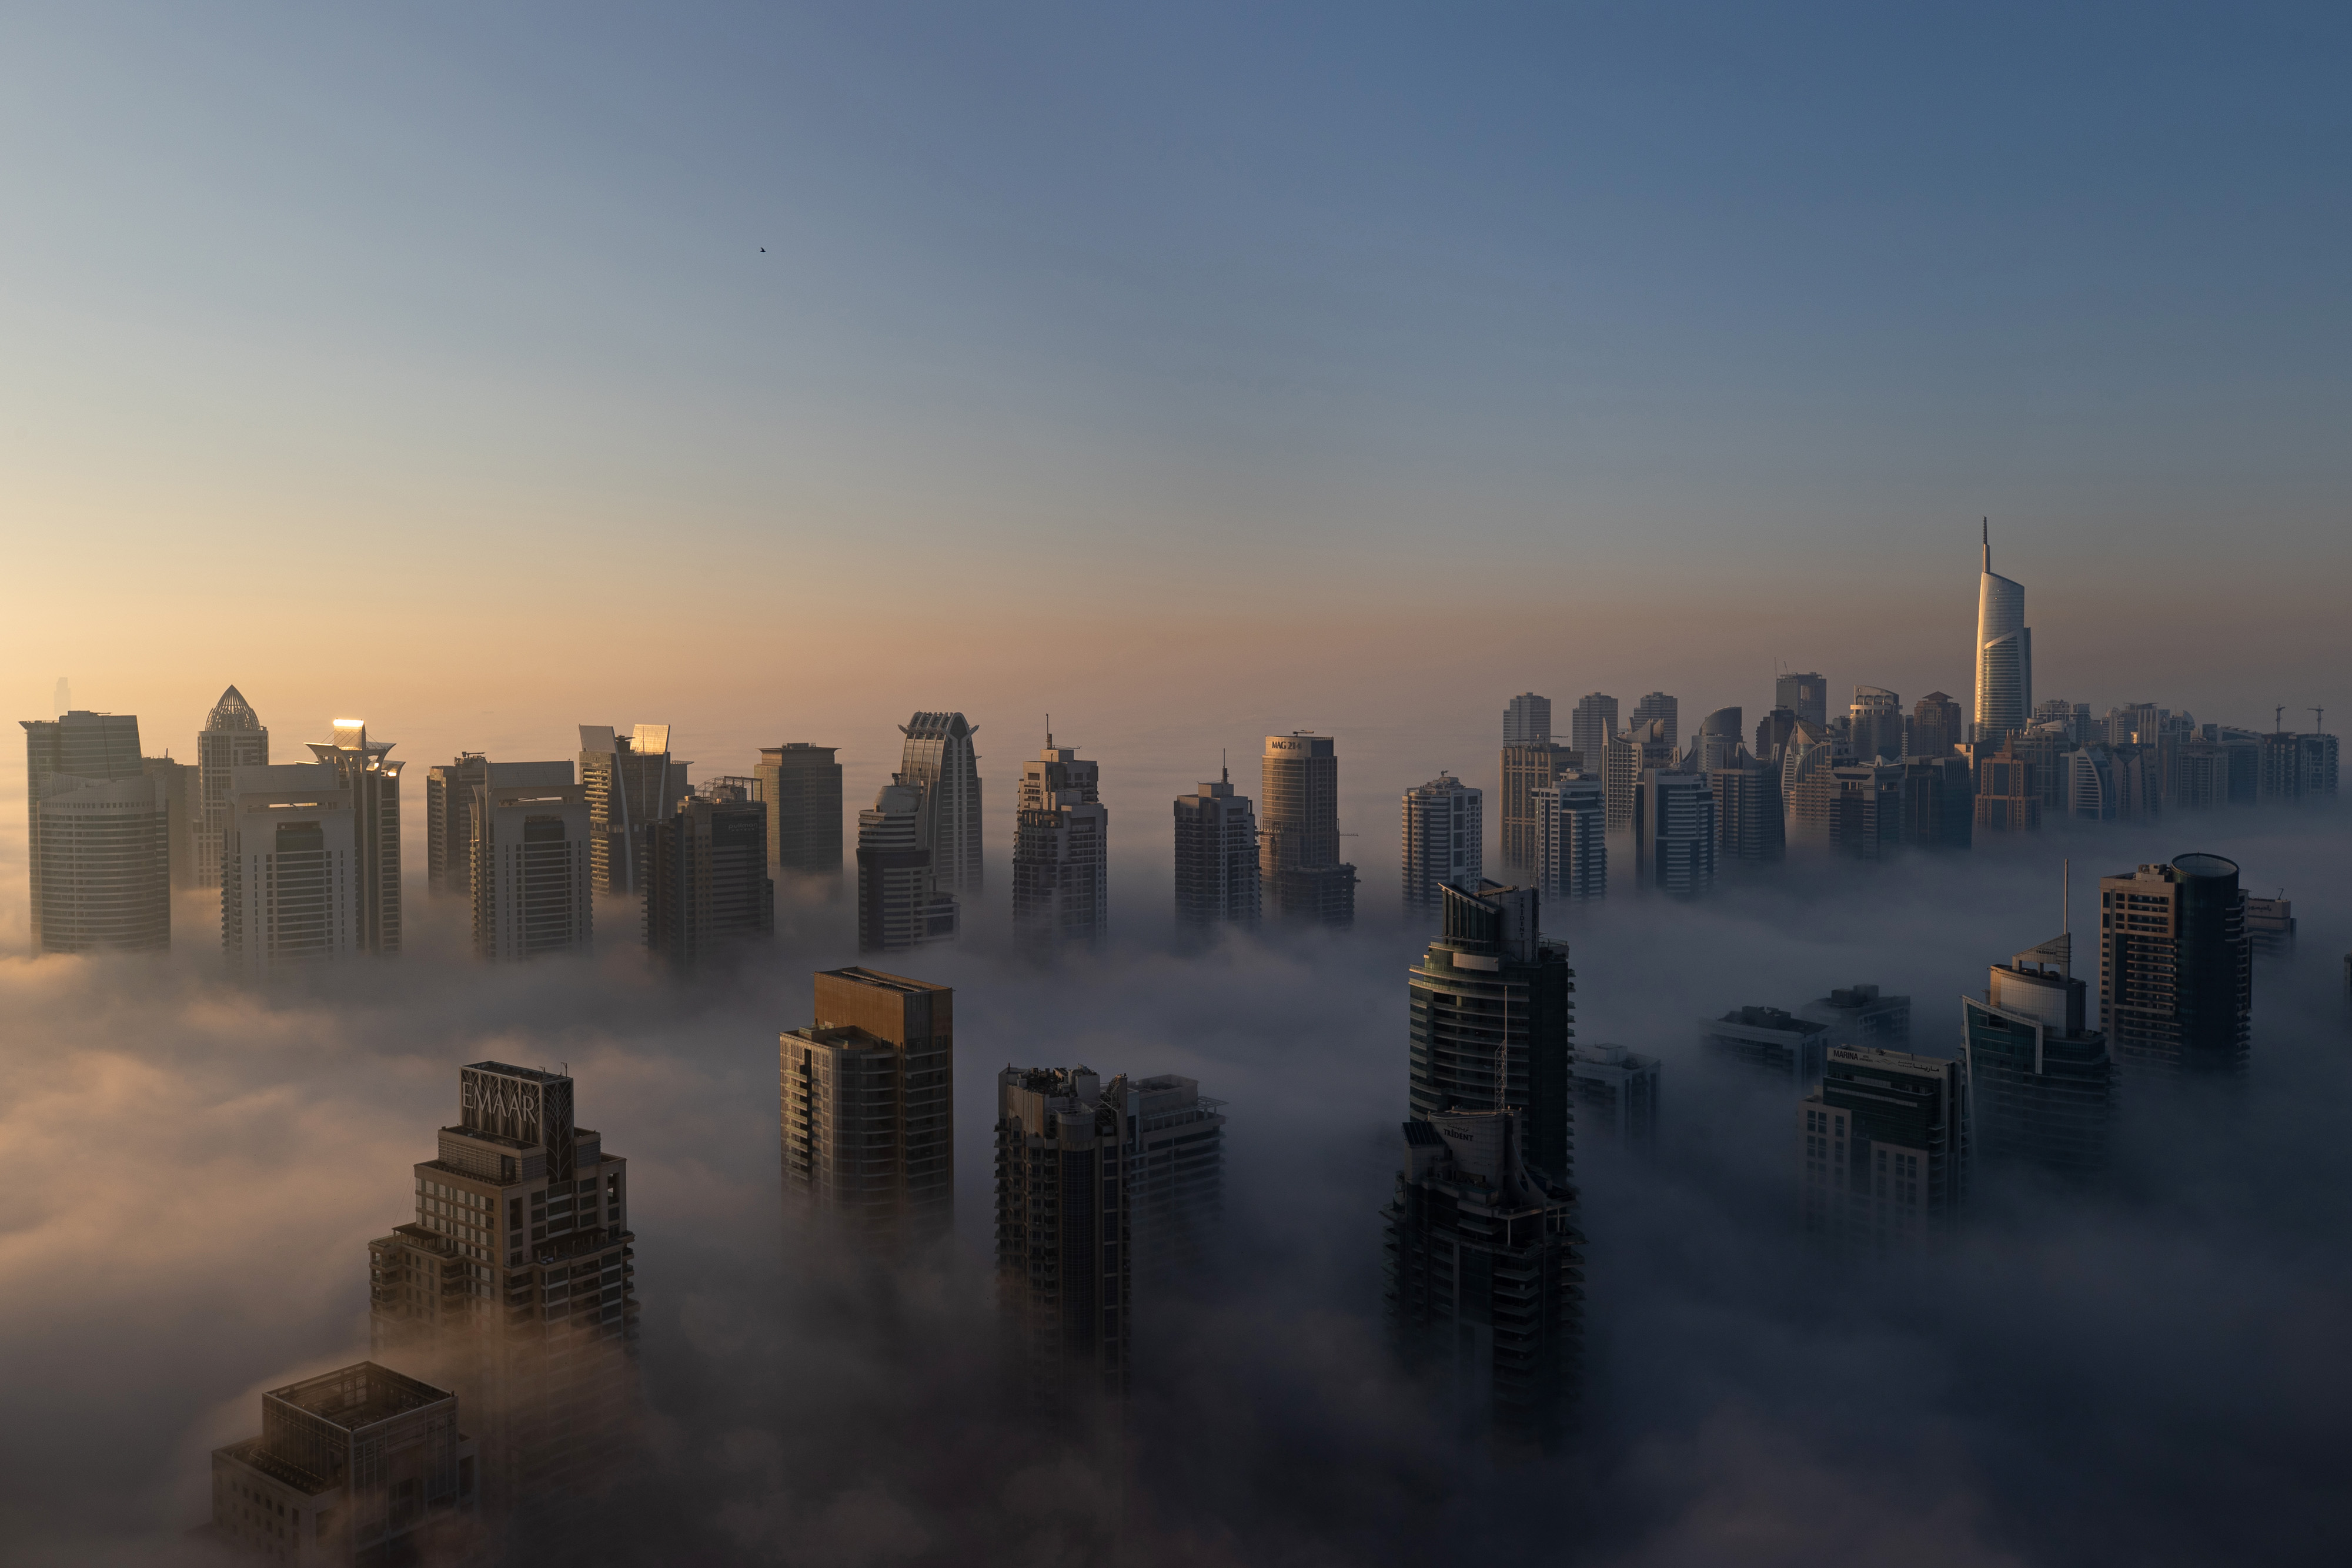 Residential and commercial skyscrapers stand among morning fog in the Jumeirah Lakes Towers and Dubai Marina districts of Dubai, United Arab Emirates, on Sunday, Jan. 17, 2021. Dubai is hoping one of the world’s fastest vaccination programs and rapid testing technology will help achieve its goal of holding the Expo 2020 event this year, after the coronavirus pandemic forced a delay.